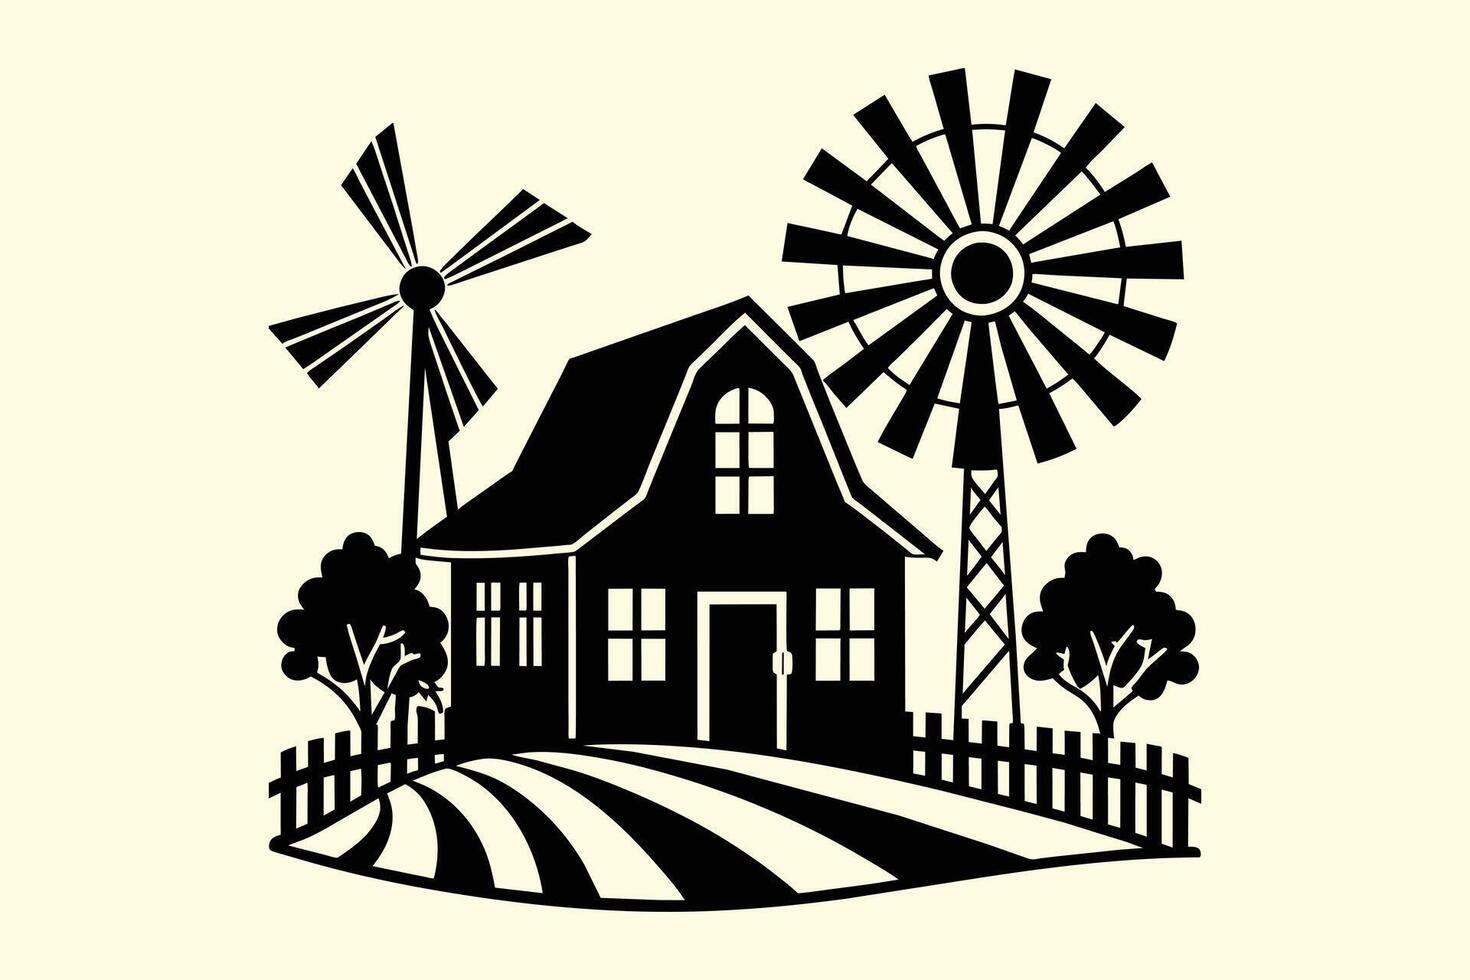 Windmill with Farm House illustration Silhouette vector